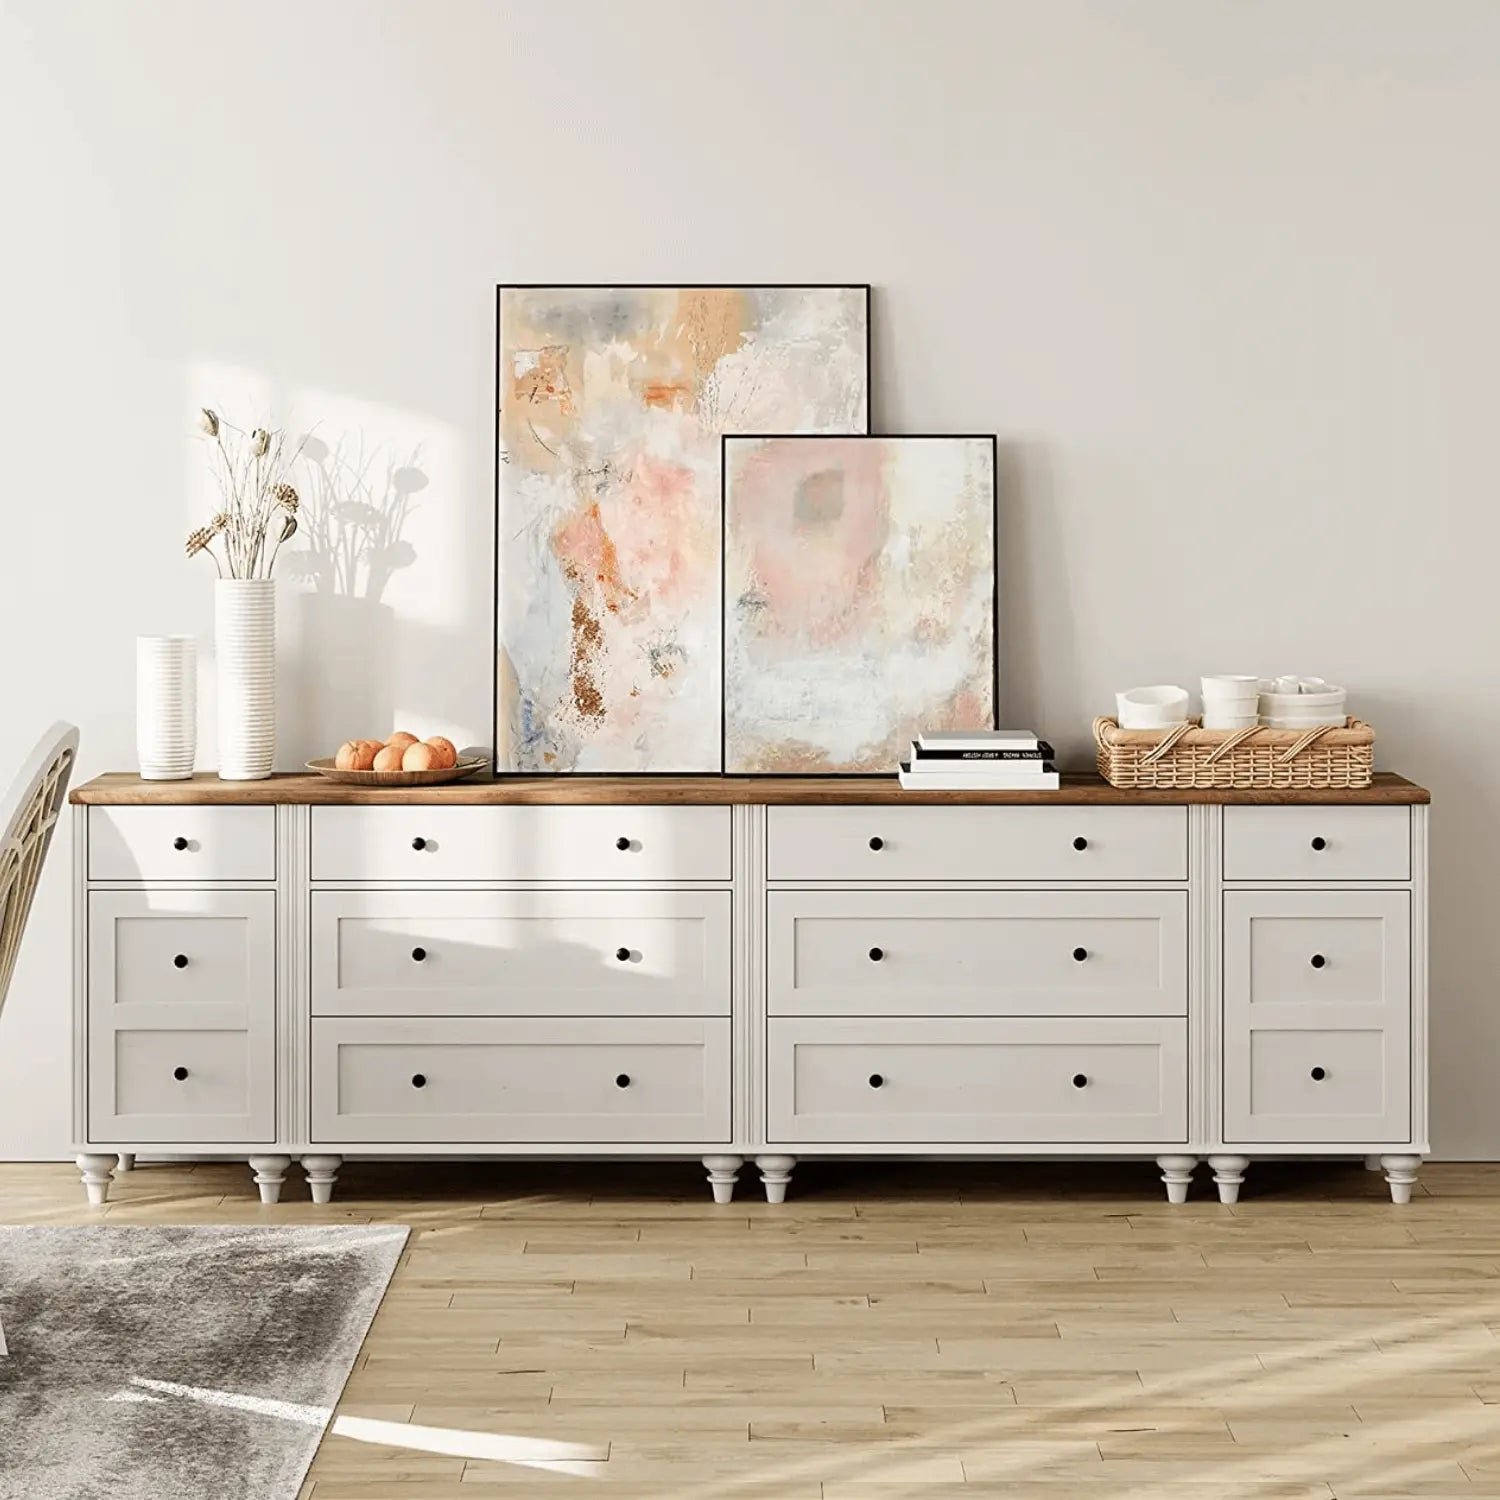 WAMPAT 34" Dresser for Bedroom with 3 Drawers, White Kids Dressers with Wide Chest of Drawers, Mid Century Modern Wooden Closet Storage Organizer, Small Dressers for Living Room, Nursery, Hallway